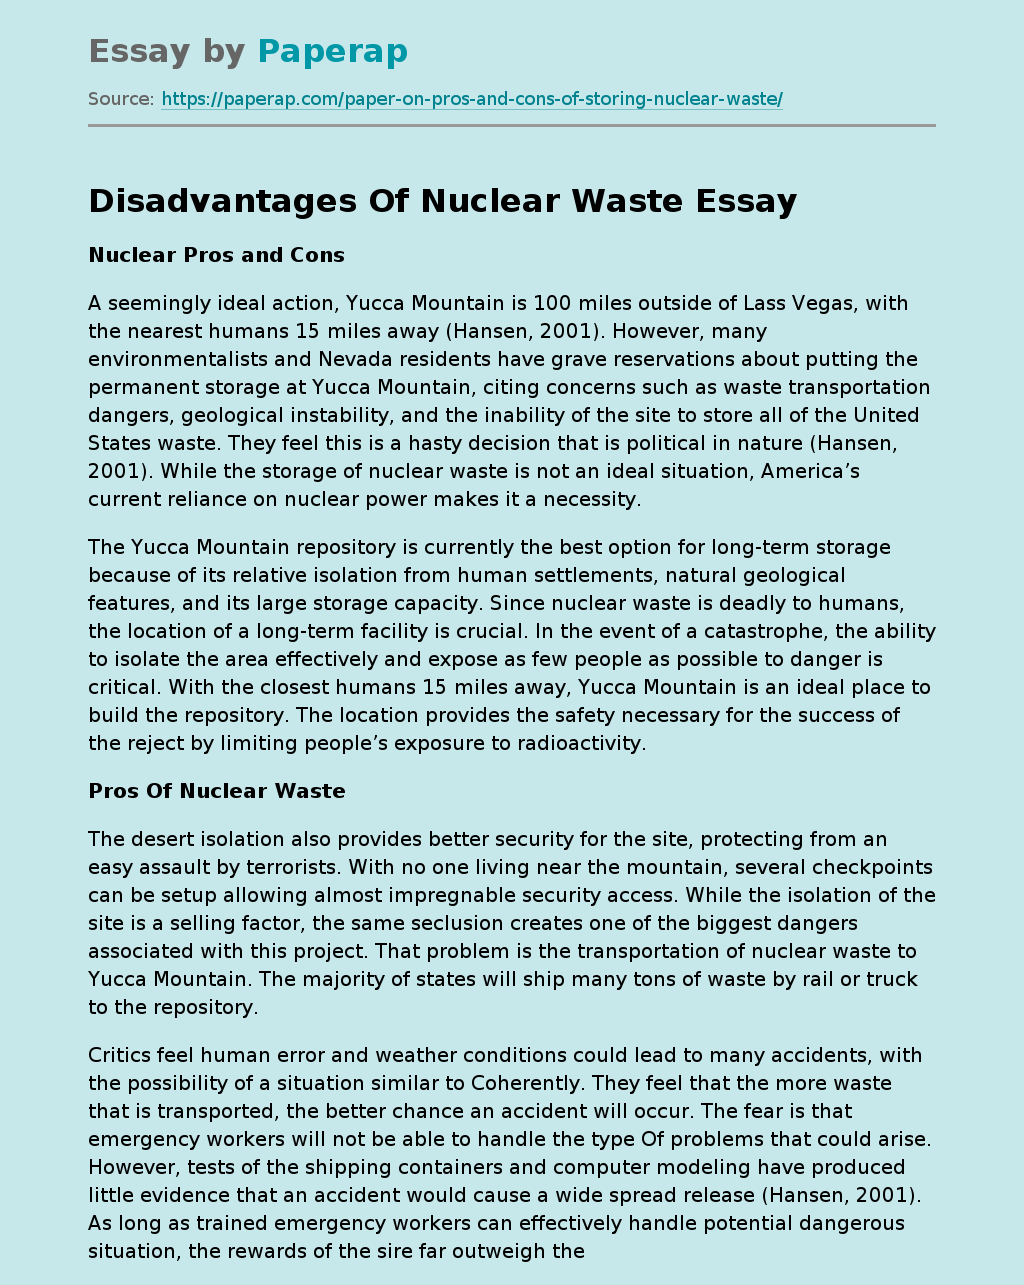 Disadvantages Of Nuclear Waste